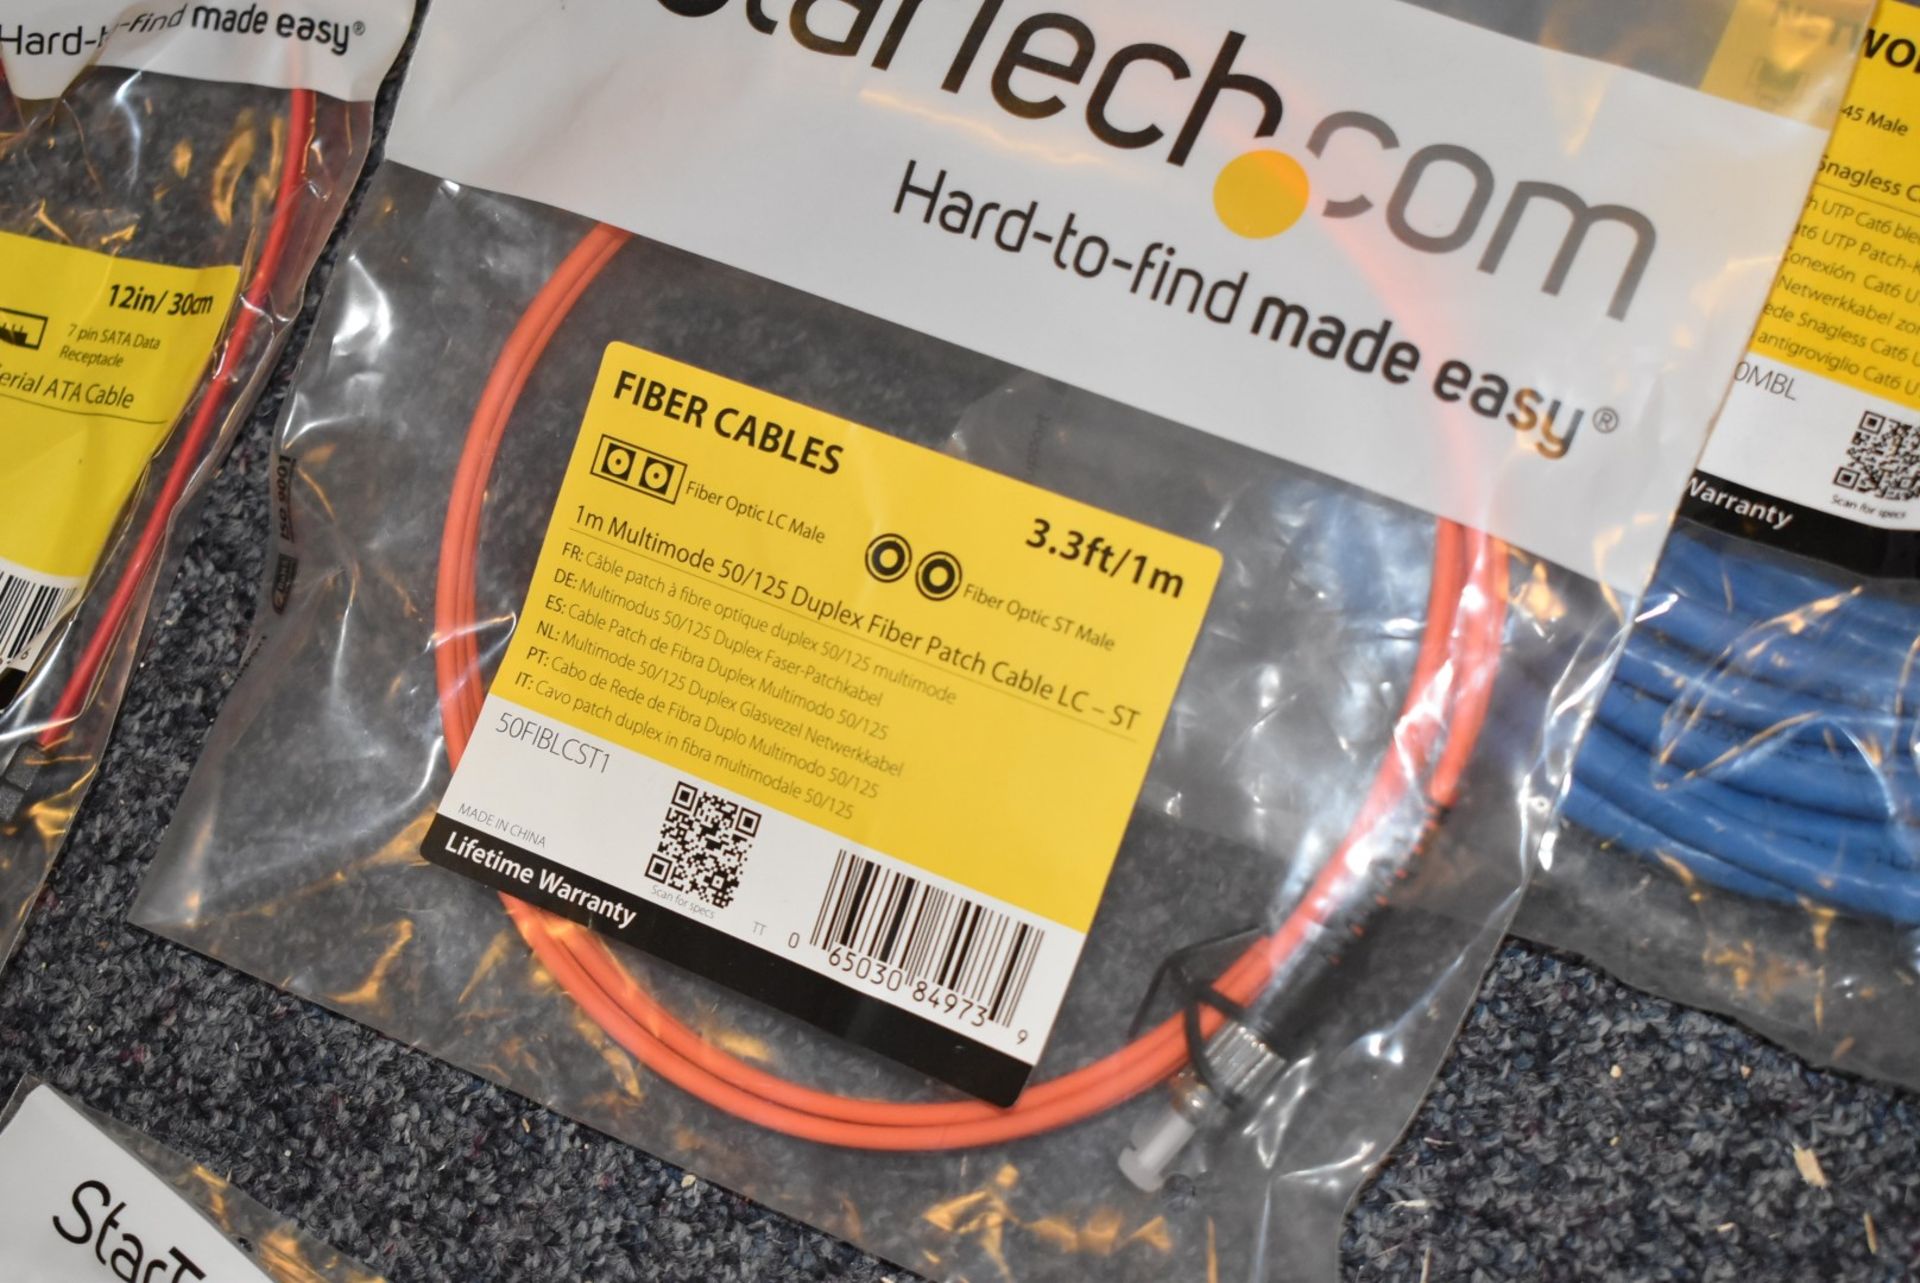 177 x Assorted StarTech Cables - Huge Lot in Original Packing - Various Cables Included - Image 17 of 50